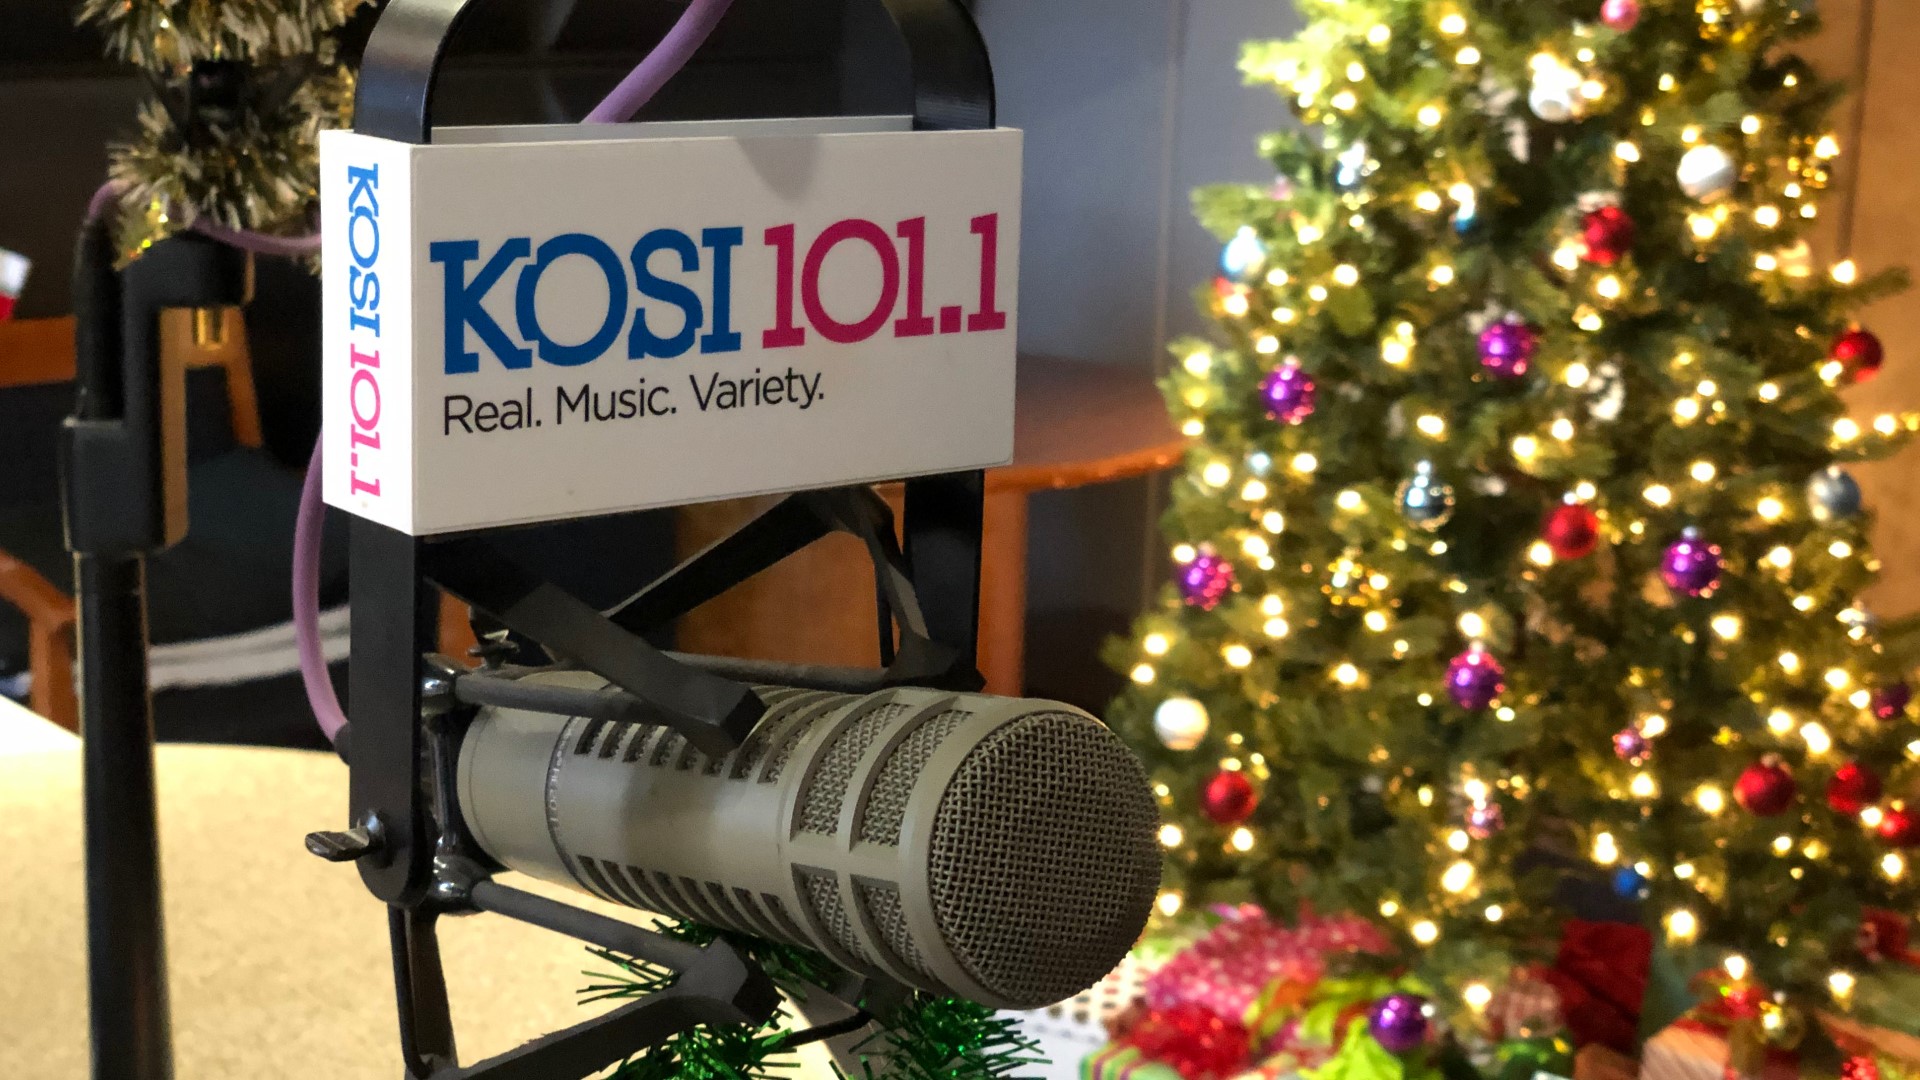 KOSI 101.1 will change to an all-Christmas format for a 22nd year. The public can attend a live event to watch the button get pressed for the big switch.